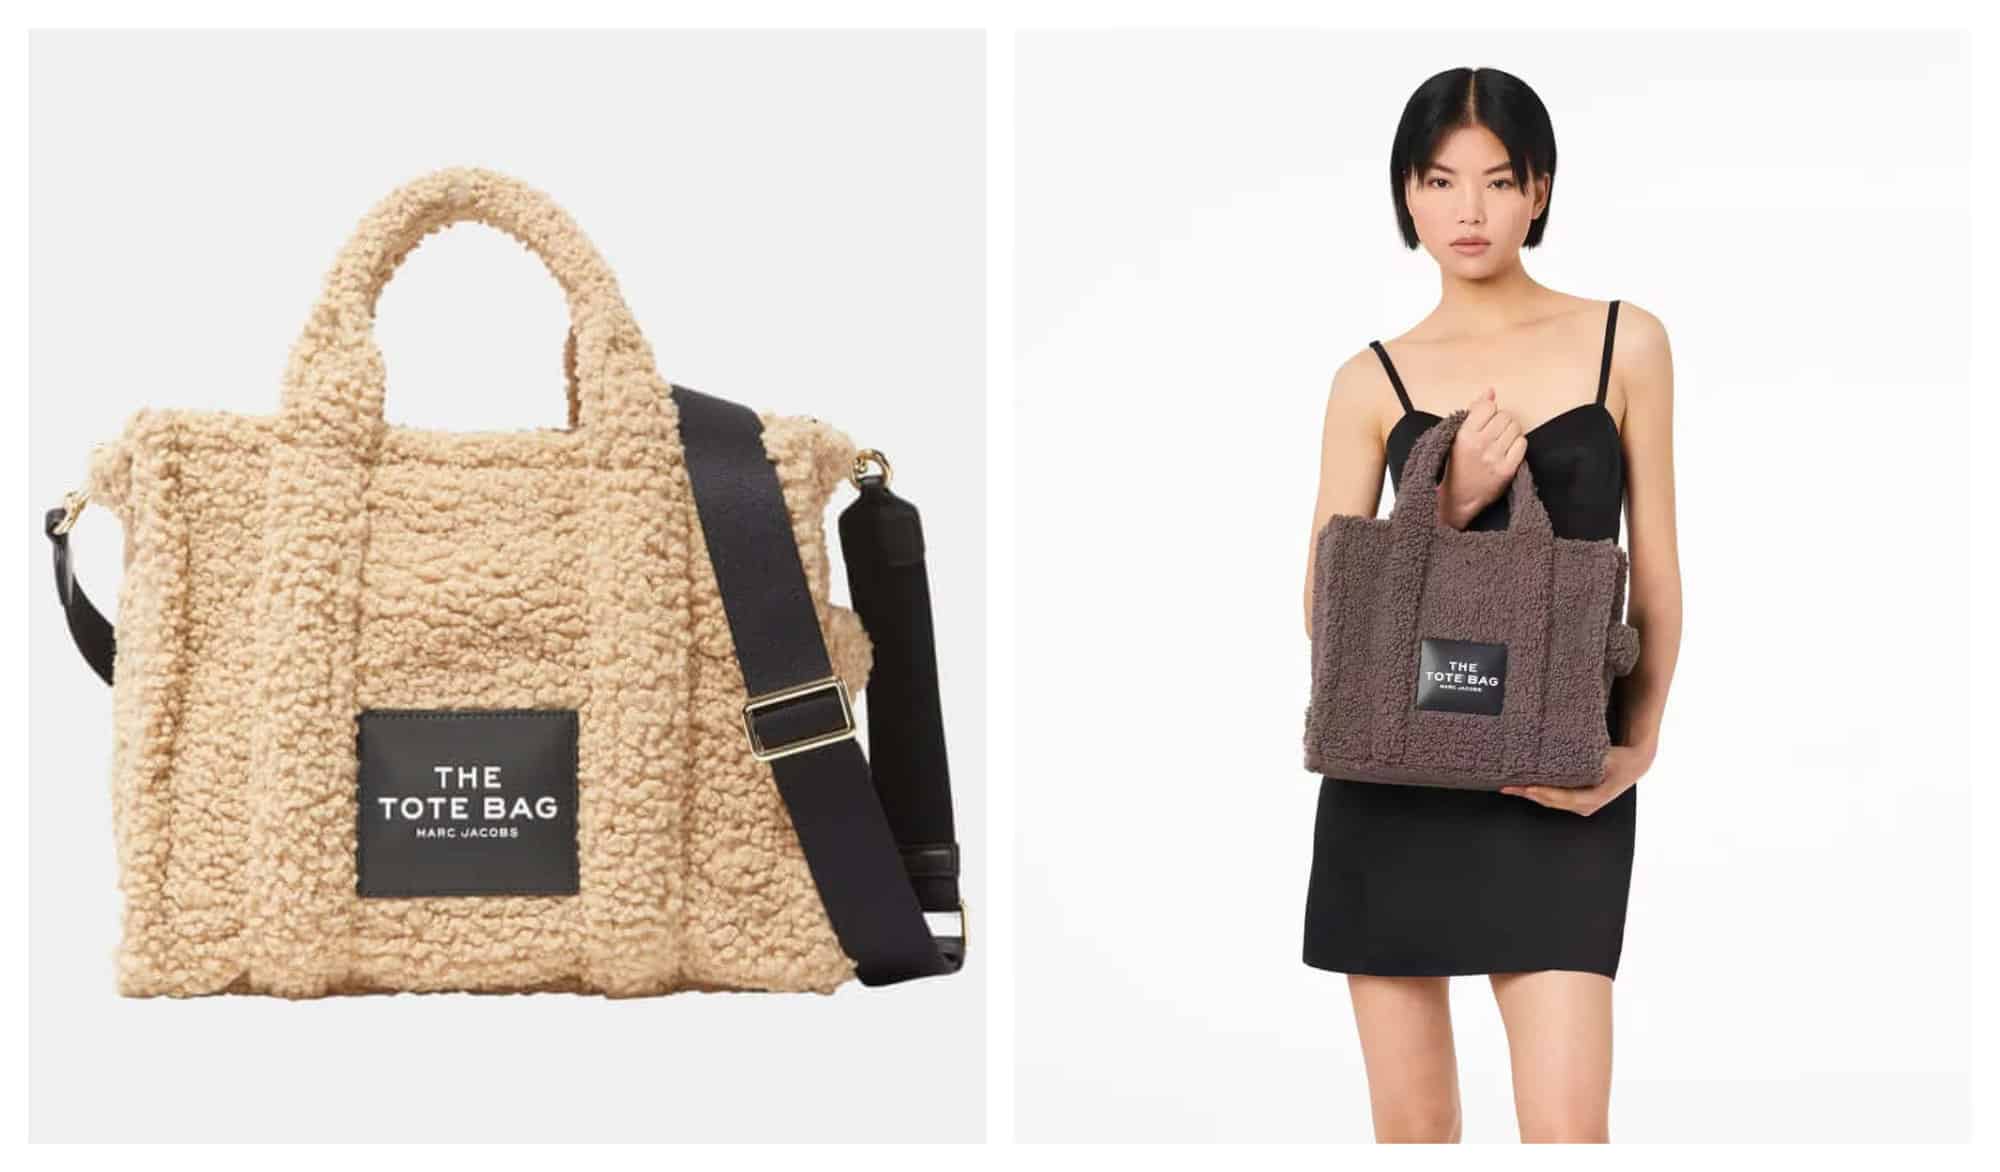 Left: The Teddy Tote Bag from Marc Jacobs in a cream color is displayed with its iconic large label on the front. Right: A woman models the Teddy Tote Bag from Marc Jacobs in a chocolate brown color, holding the top two straps in her right hand and holding the bag from the bottom with her left.